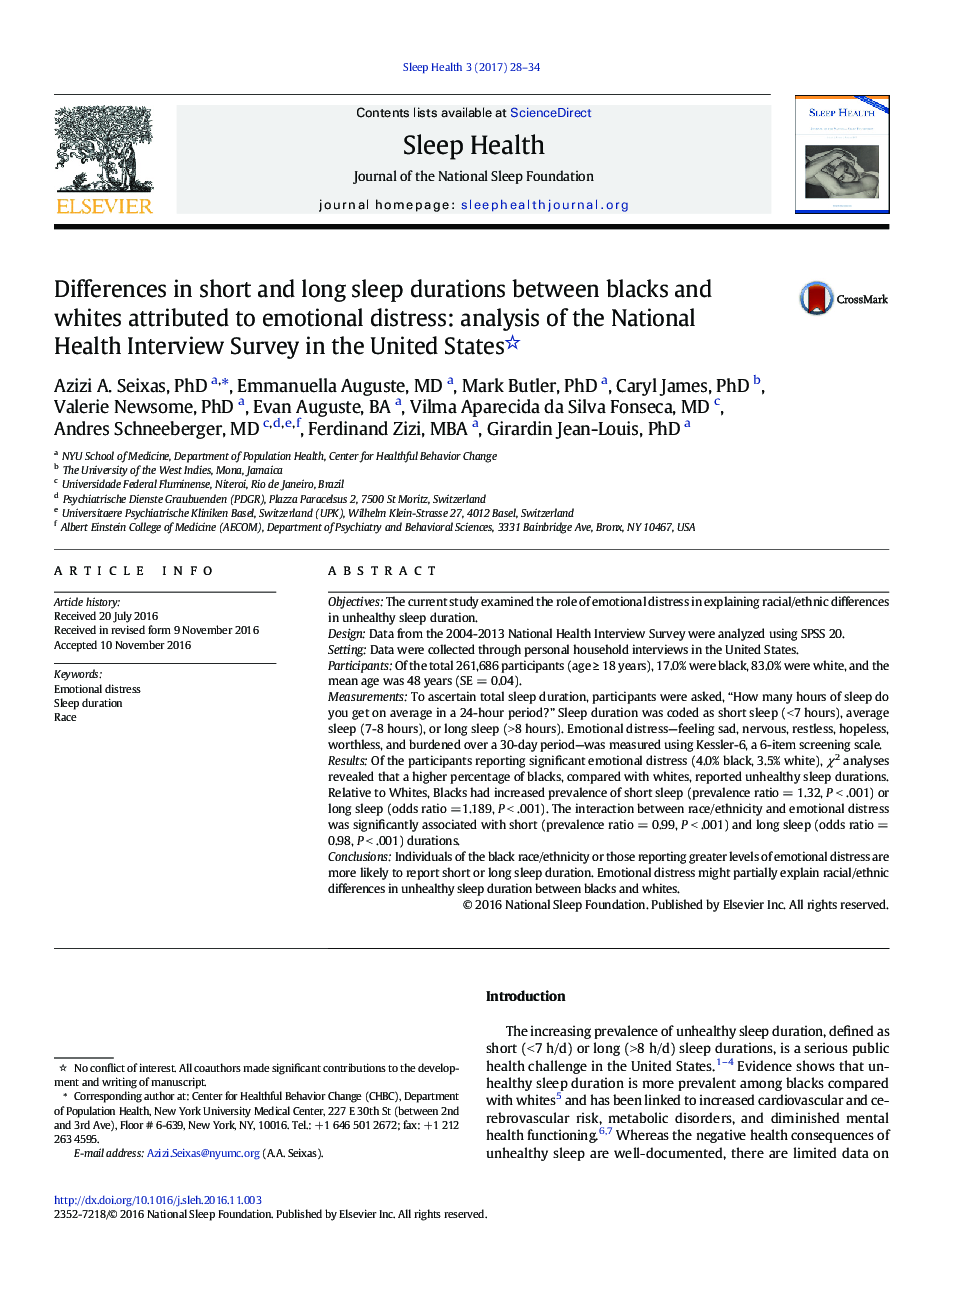 Differences in short and long sleep durations between blacks and whites attributed to emotional distress: analysis of the National Health Interview Survey in the United States